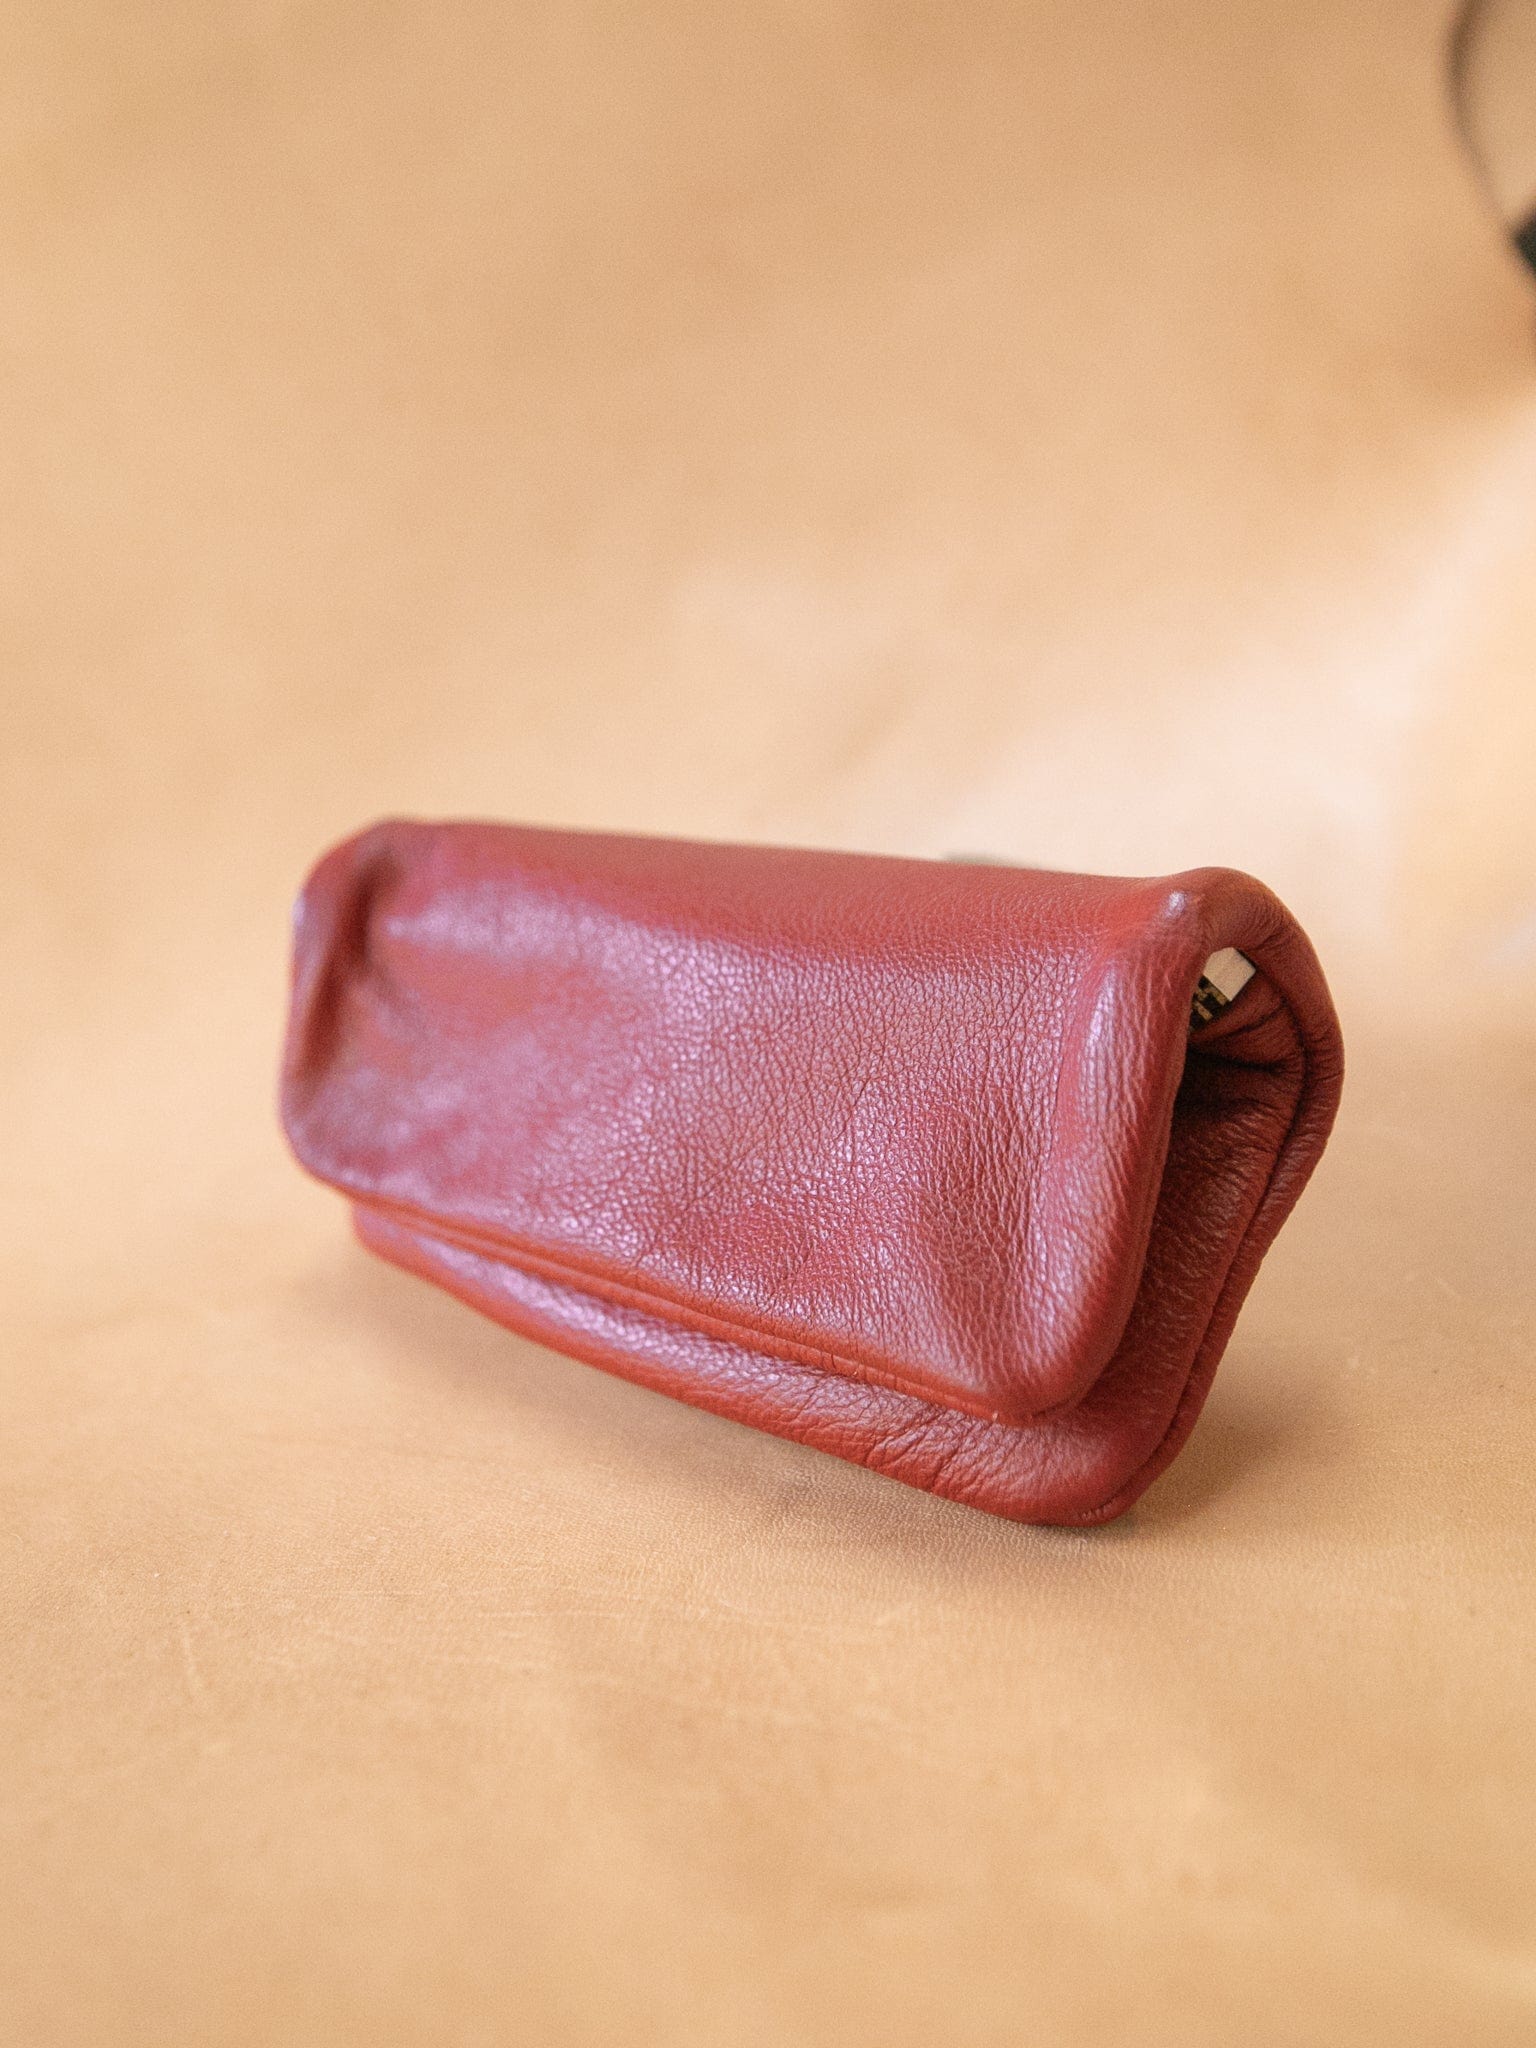 The Real McCaul Tobacco Pouches Tobacco Pouch - Cowhide Australian Made Australian Owned Leather Tobacco Pouch Australian Made Kangaroo & Cowhide Leather